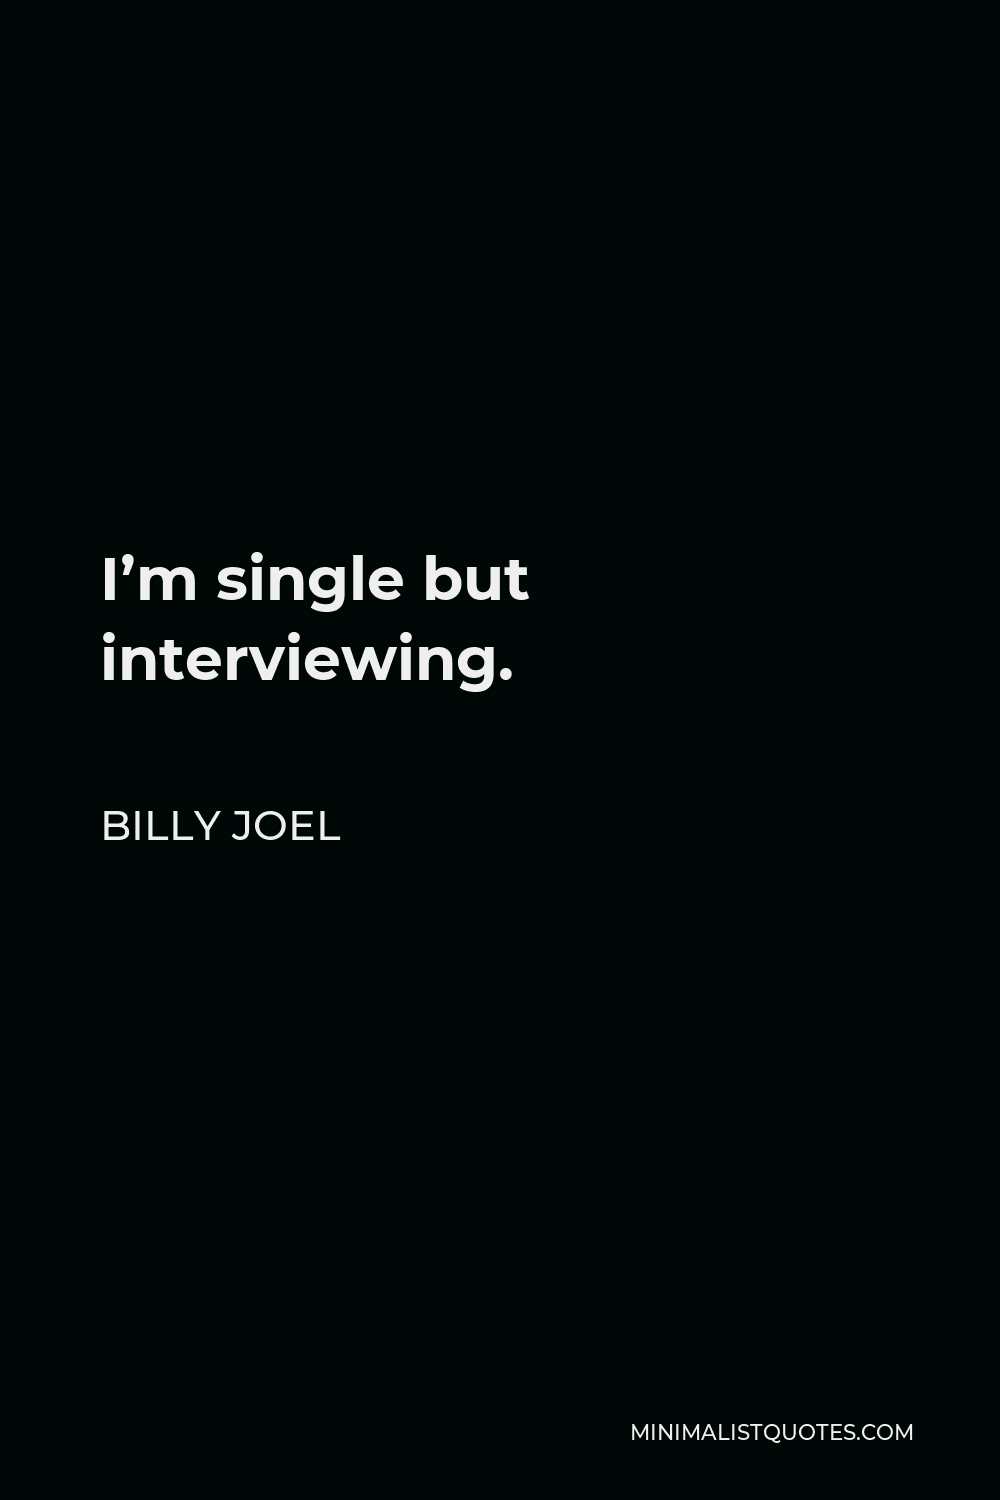 Billy Joel Quote - I’m single but interviewing.